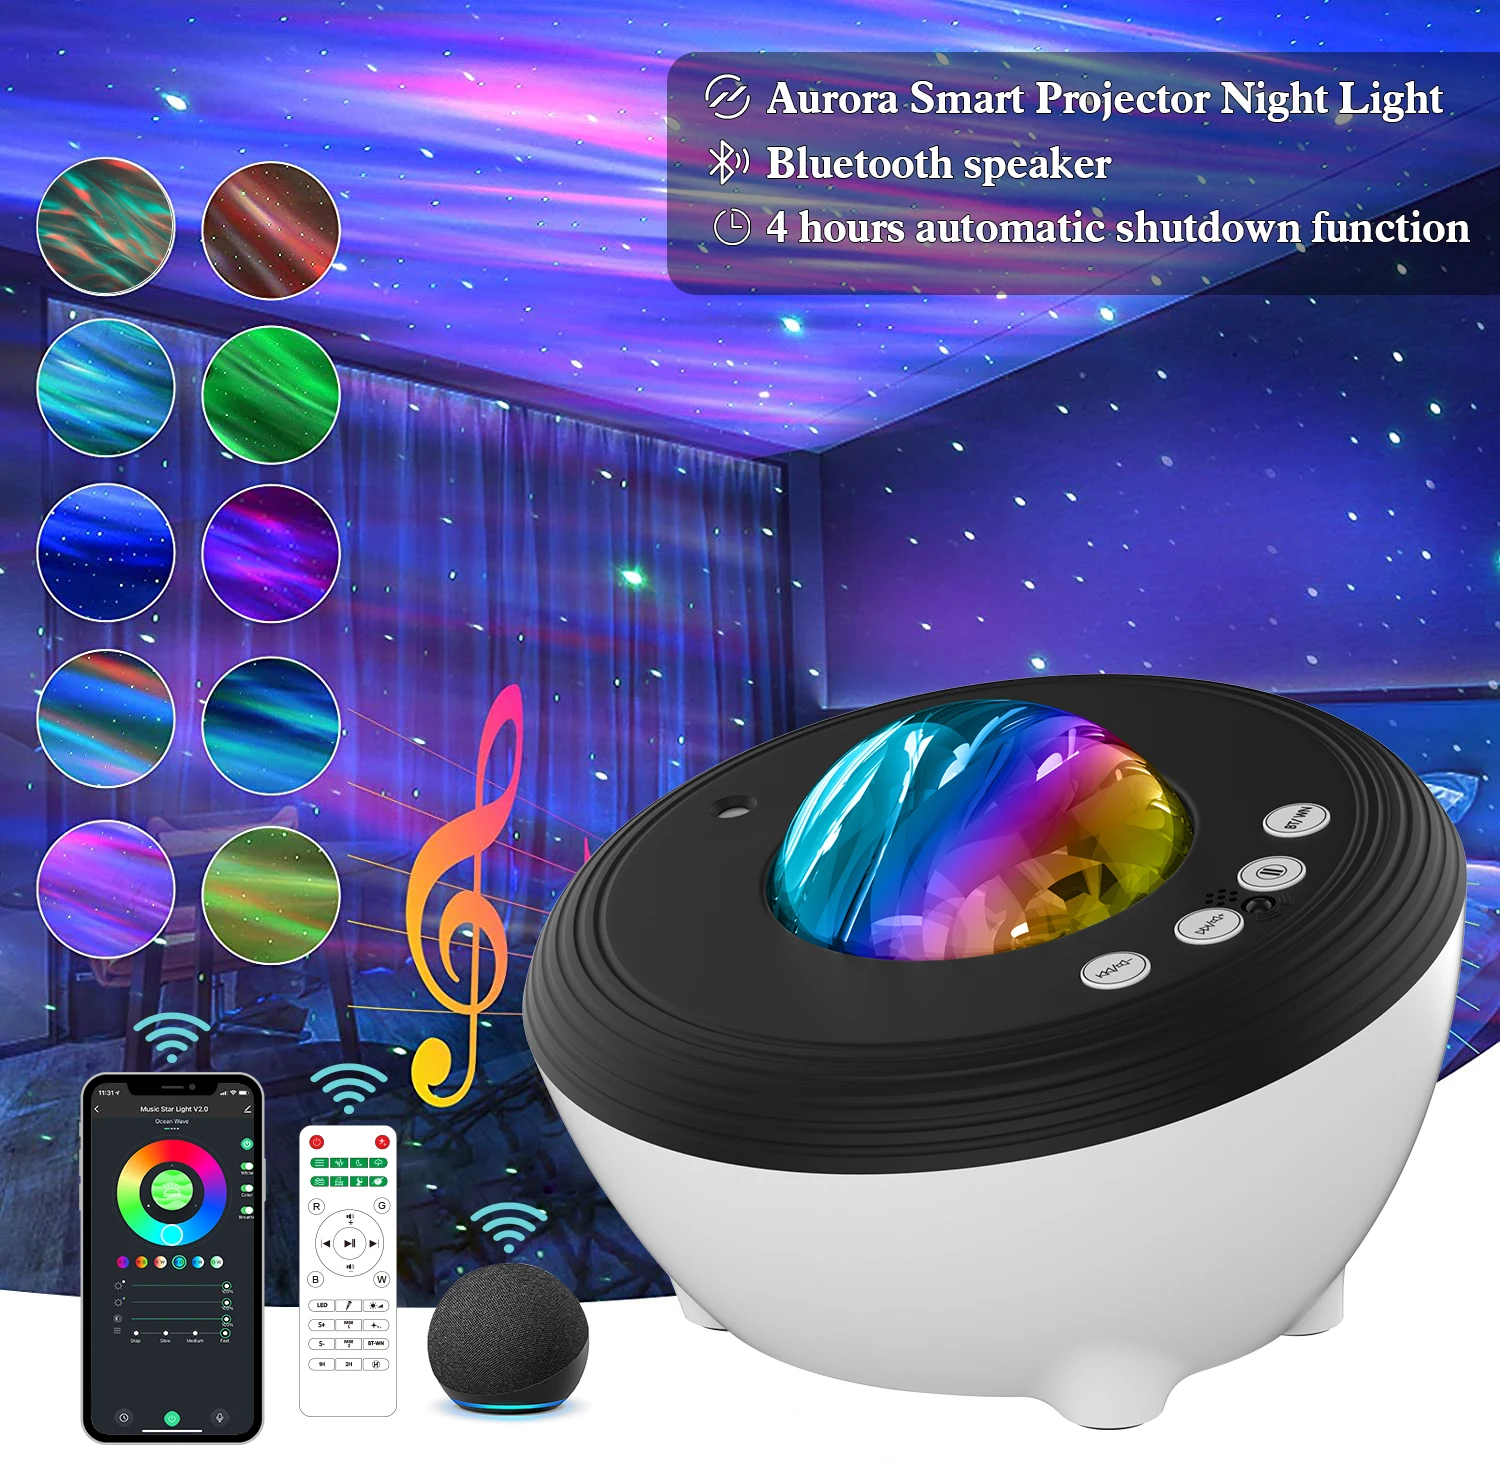 

WiFi Smart LED Night Light Aurora Galaxy Projector Room Decor Rotate Starry Sky Projection Lamp Bluetooth USB Music Player Gifts